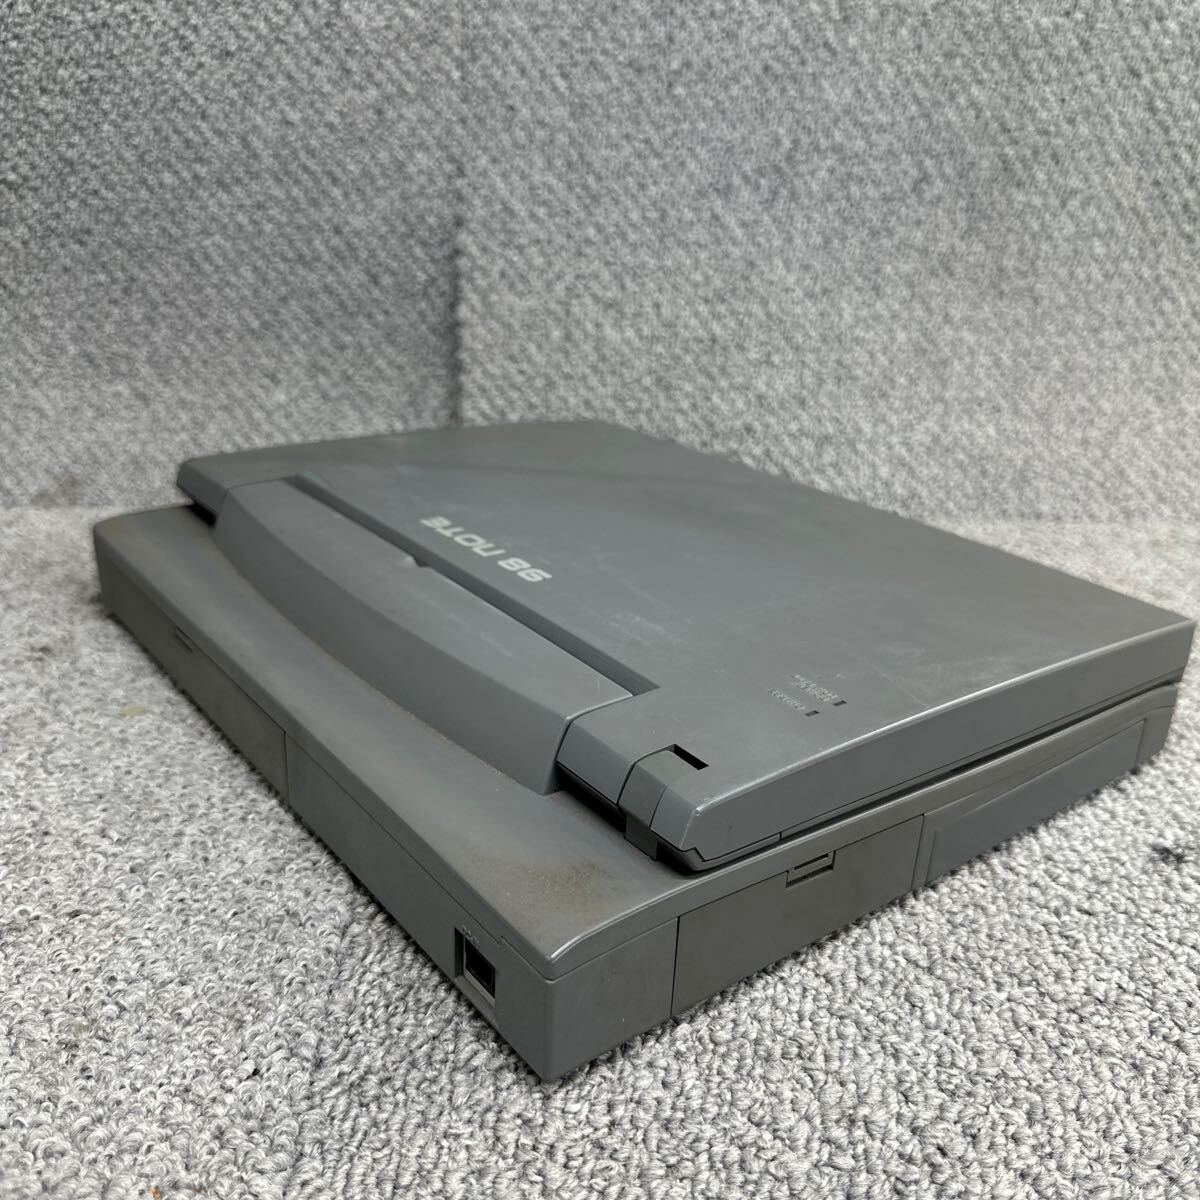 PCN98-1822 super-discount PC98 notebook NEC 98note PC-9821Ne2/340W start-up has confirmed Junk including in a package possibility 